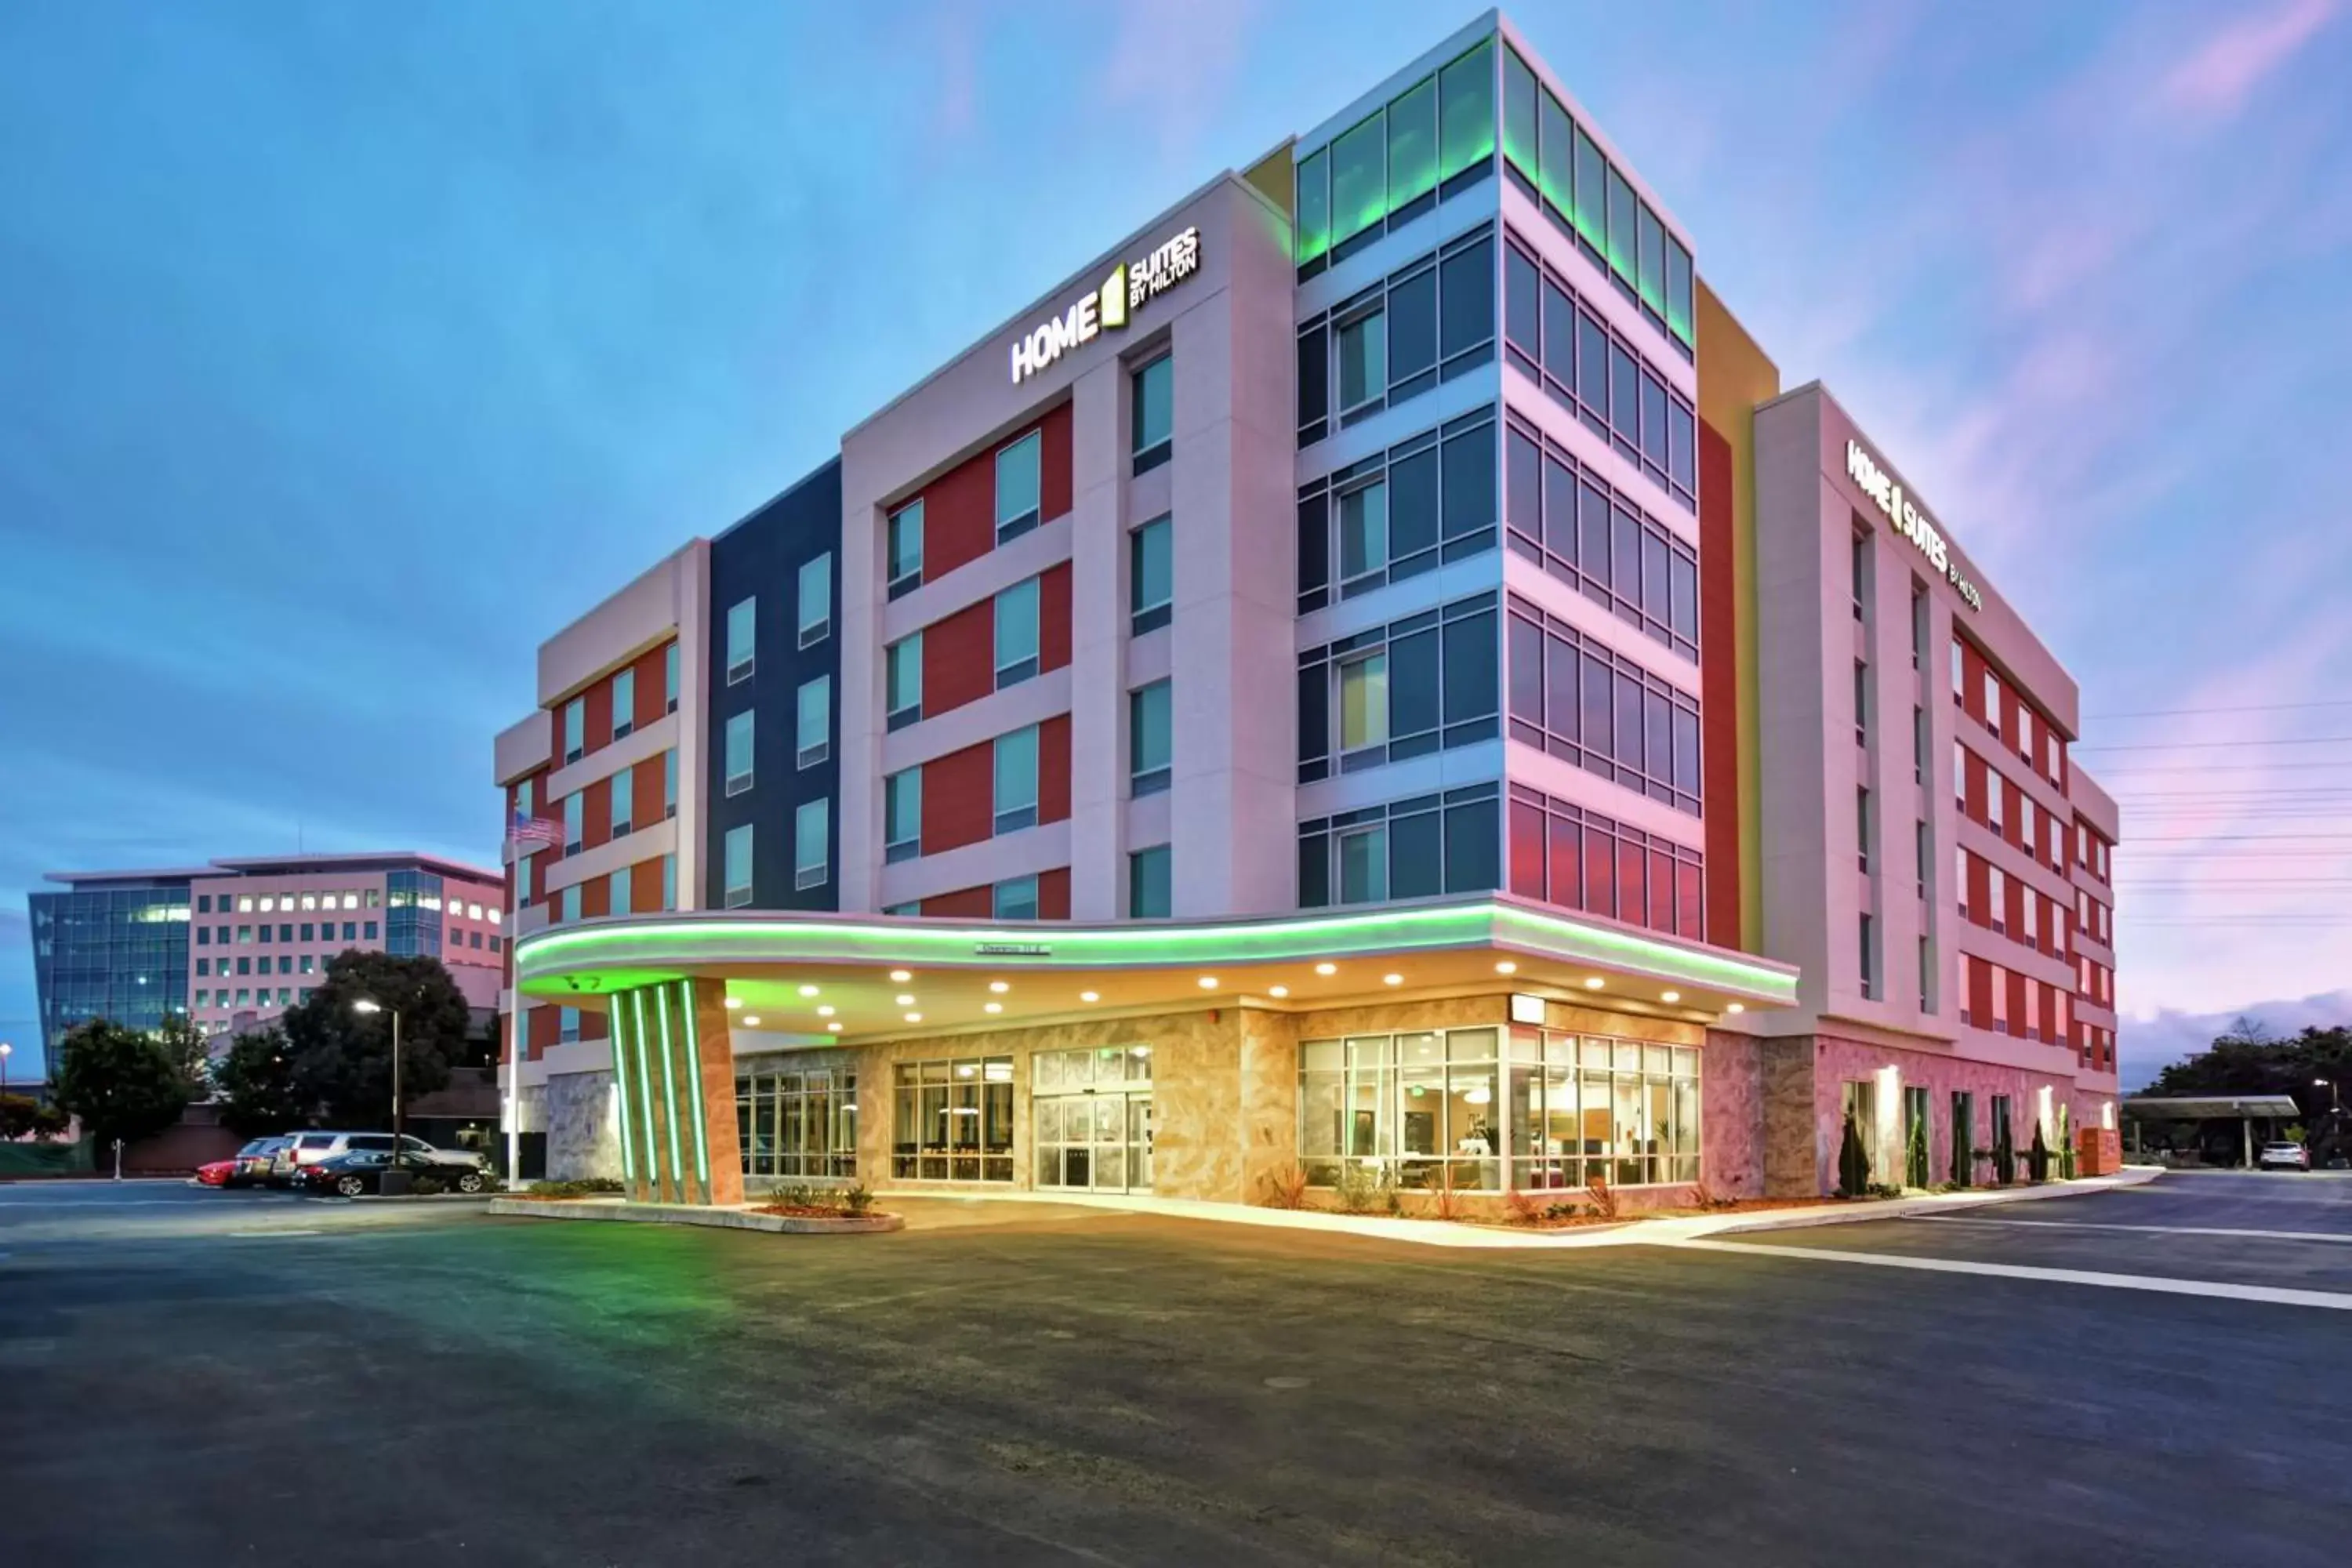 Property Building in Home2 Suites By Hilton San Francisco Airport North